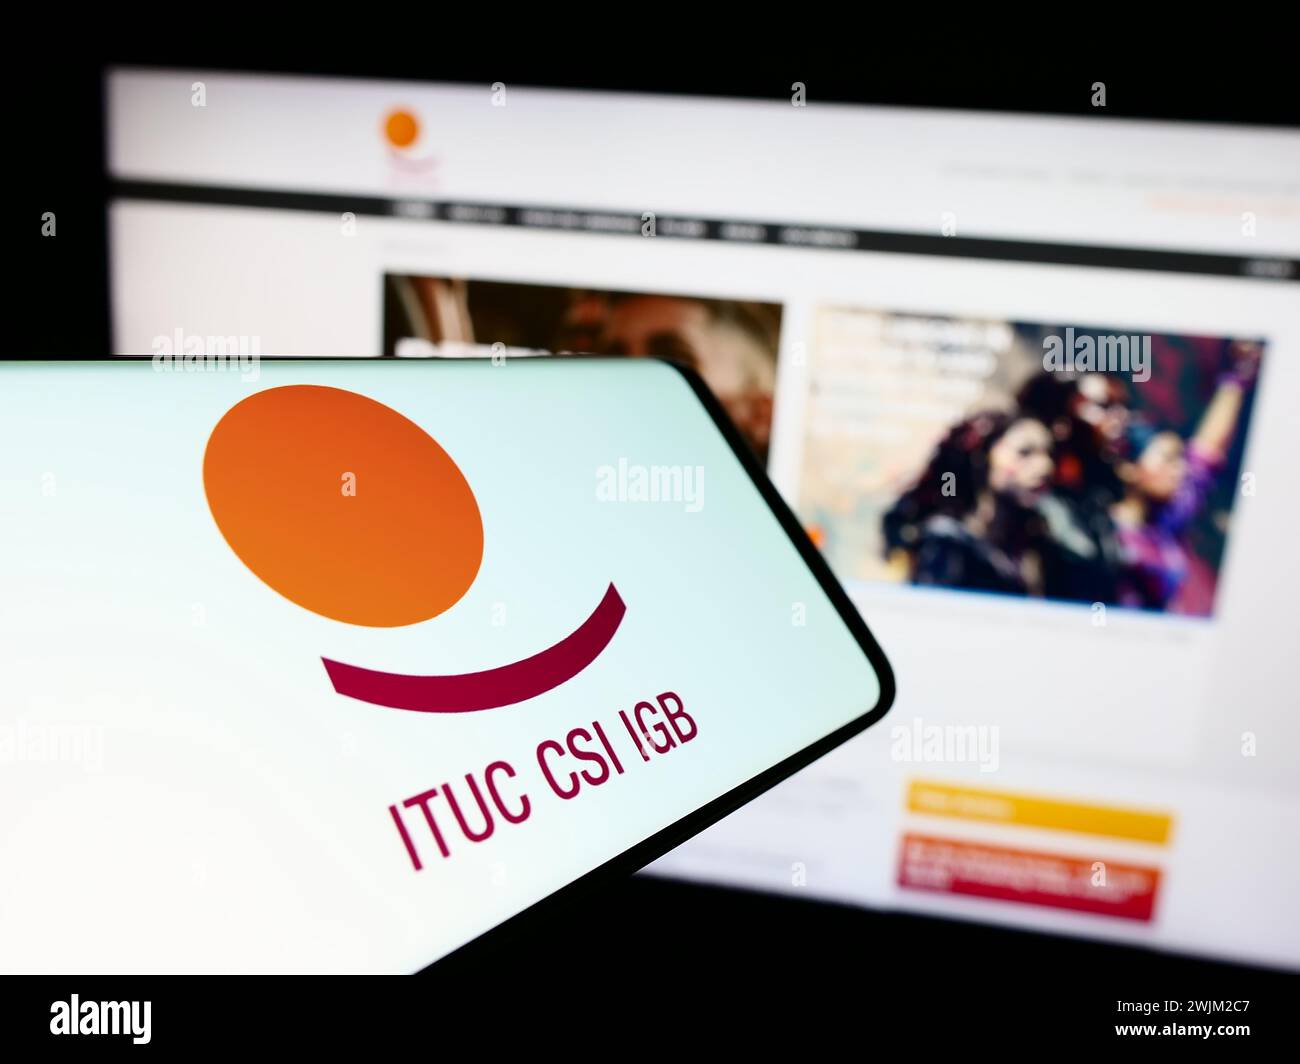 Cellphone with logo of federation International Trade Union Confederation (ITUC) in front of website. Focus on center-right of phone display. Stock Photo